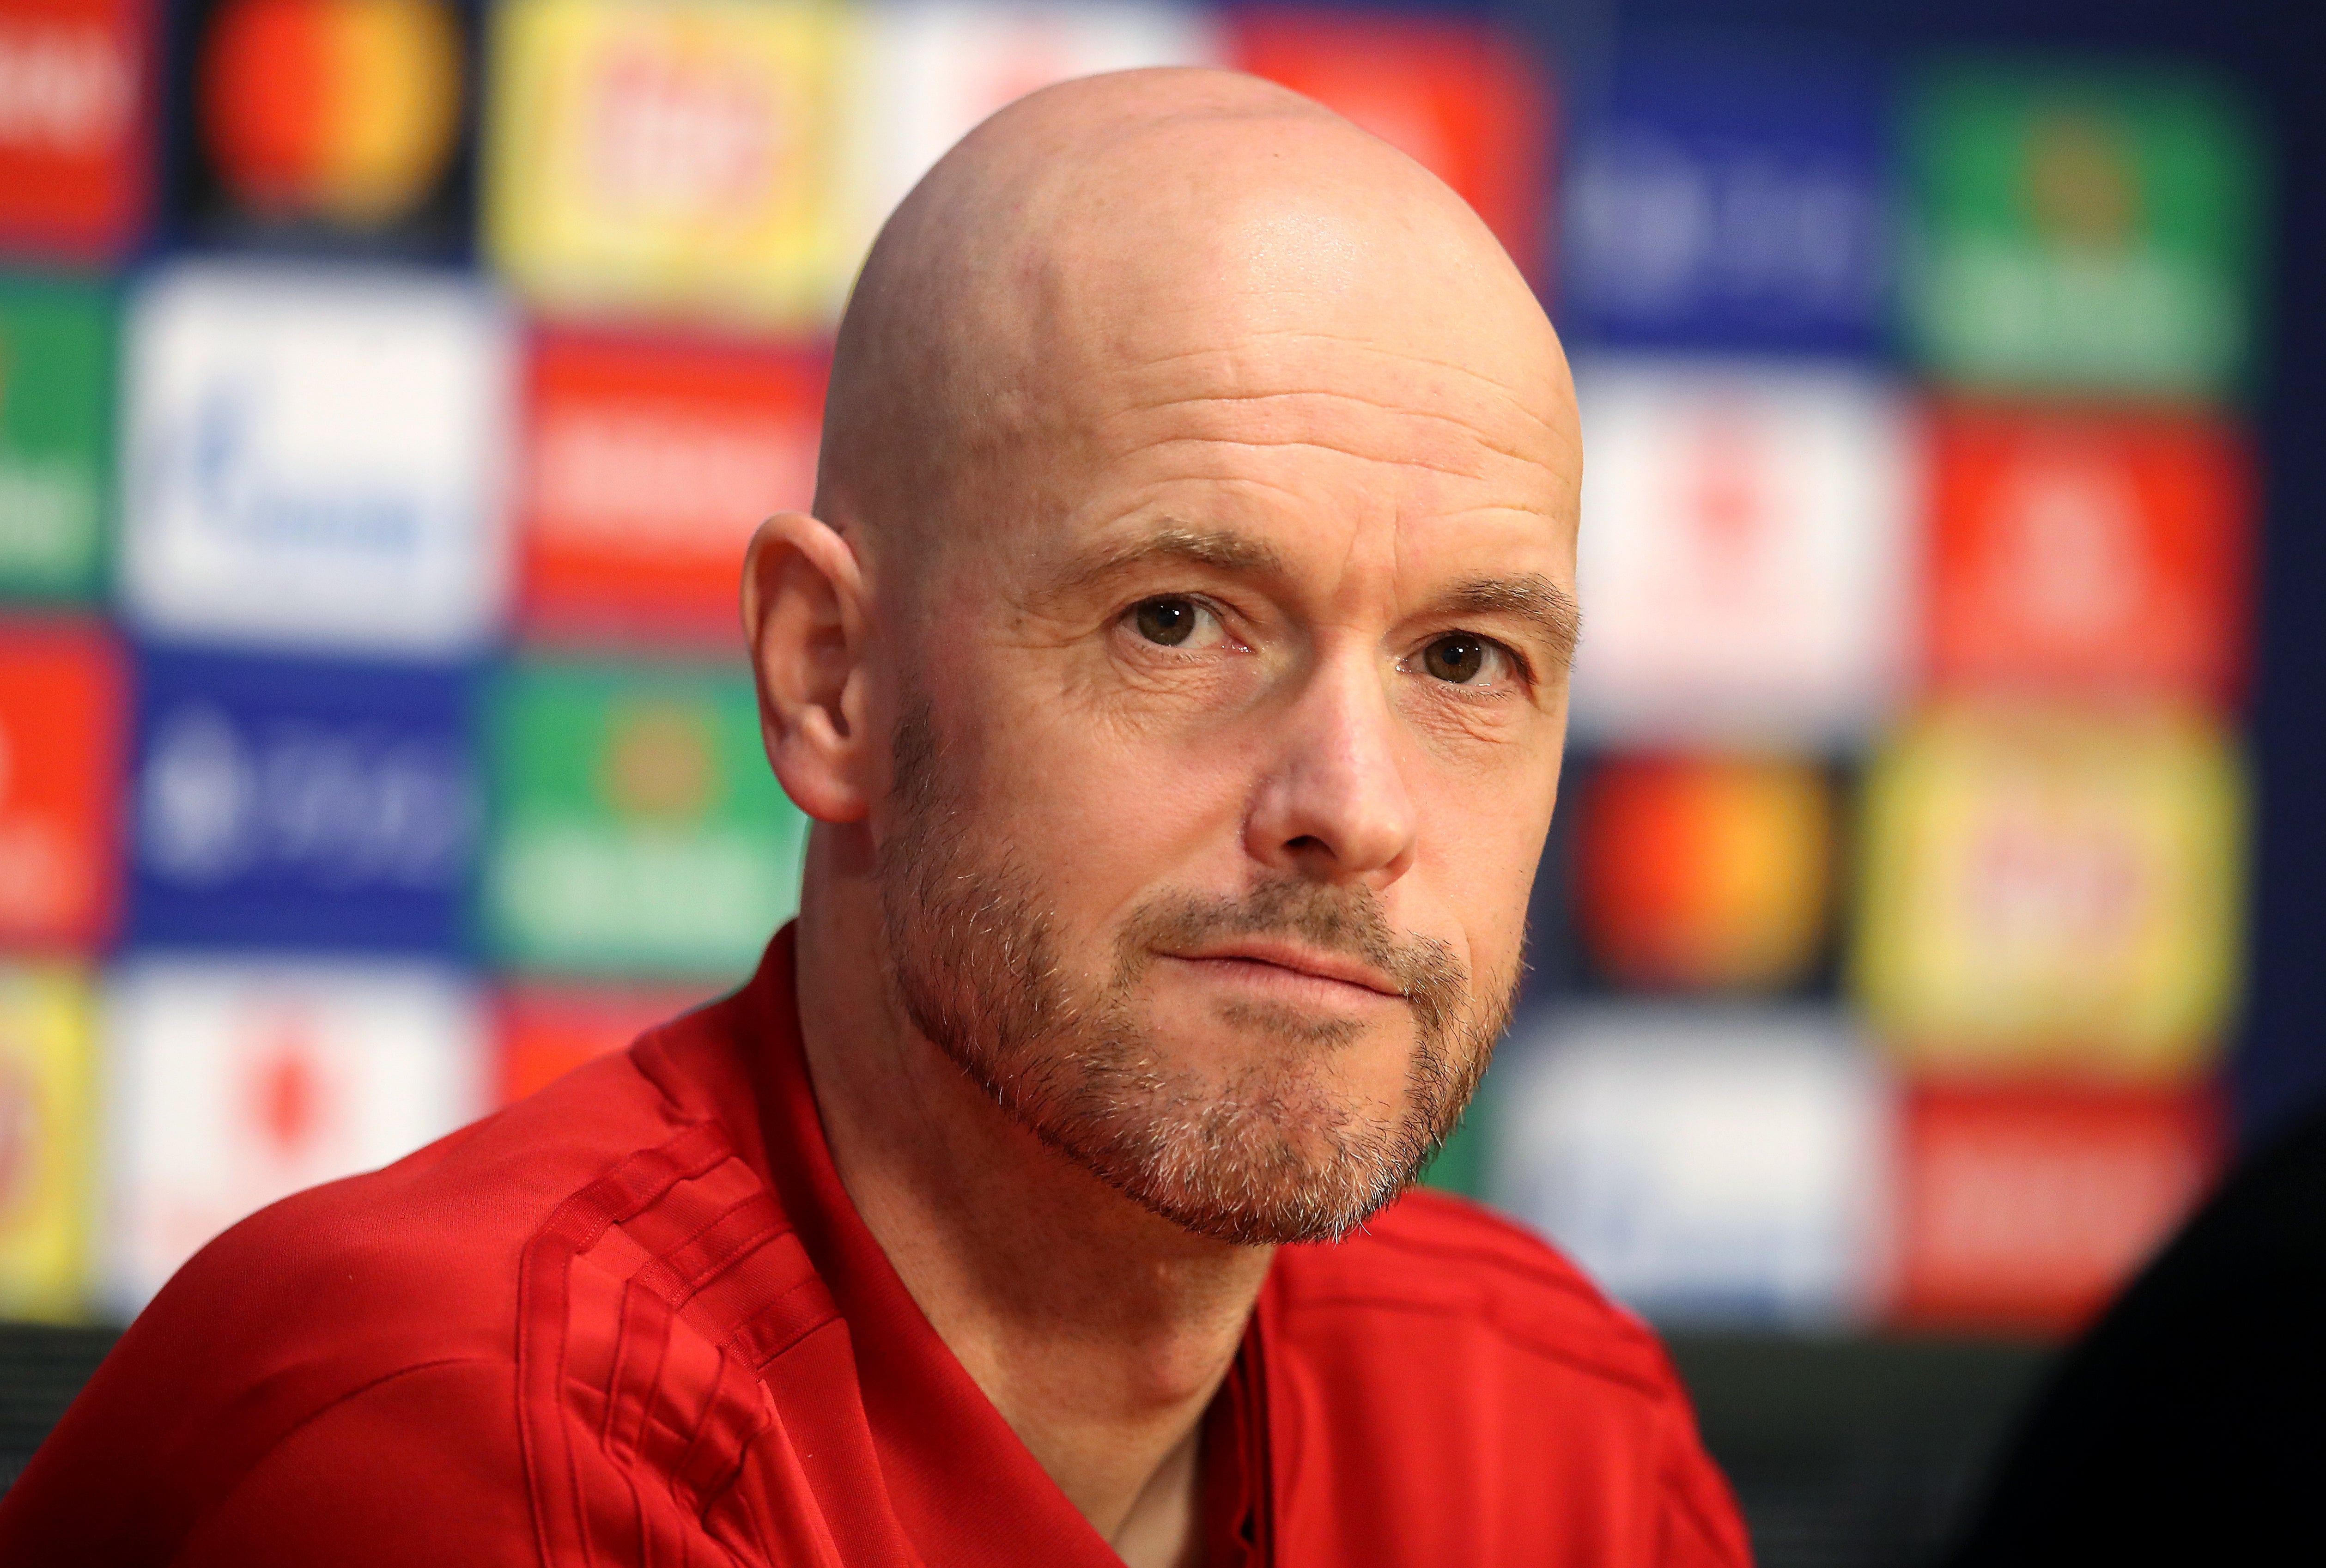 Erik ten Hag is Manchester United’s new manager